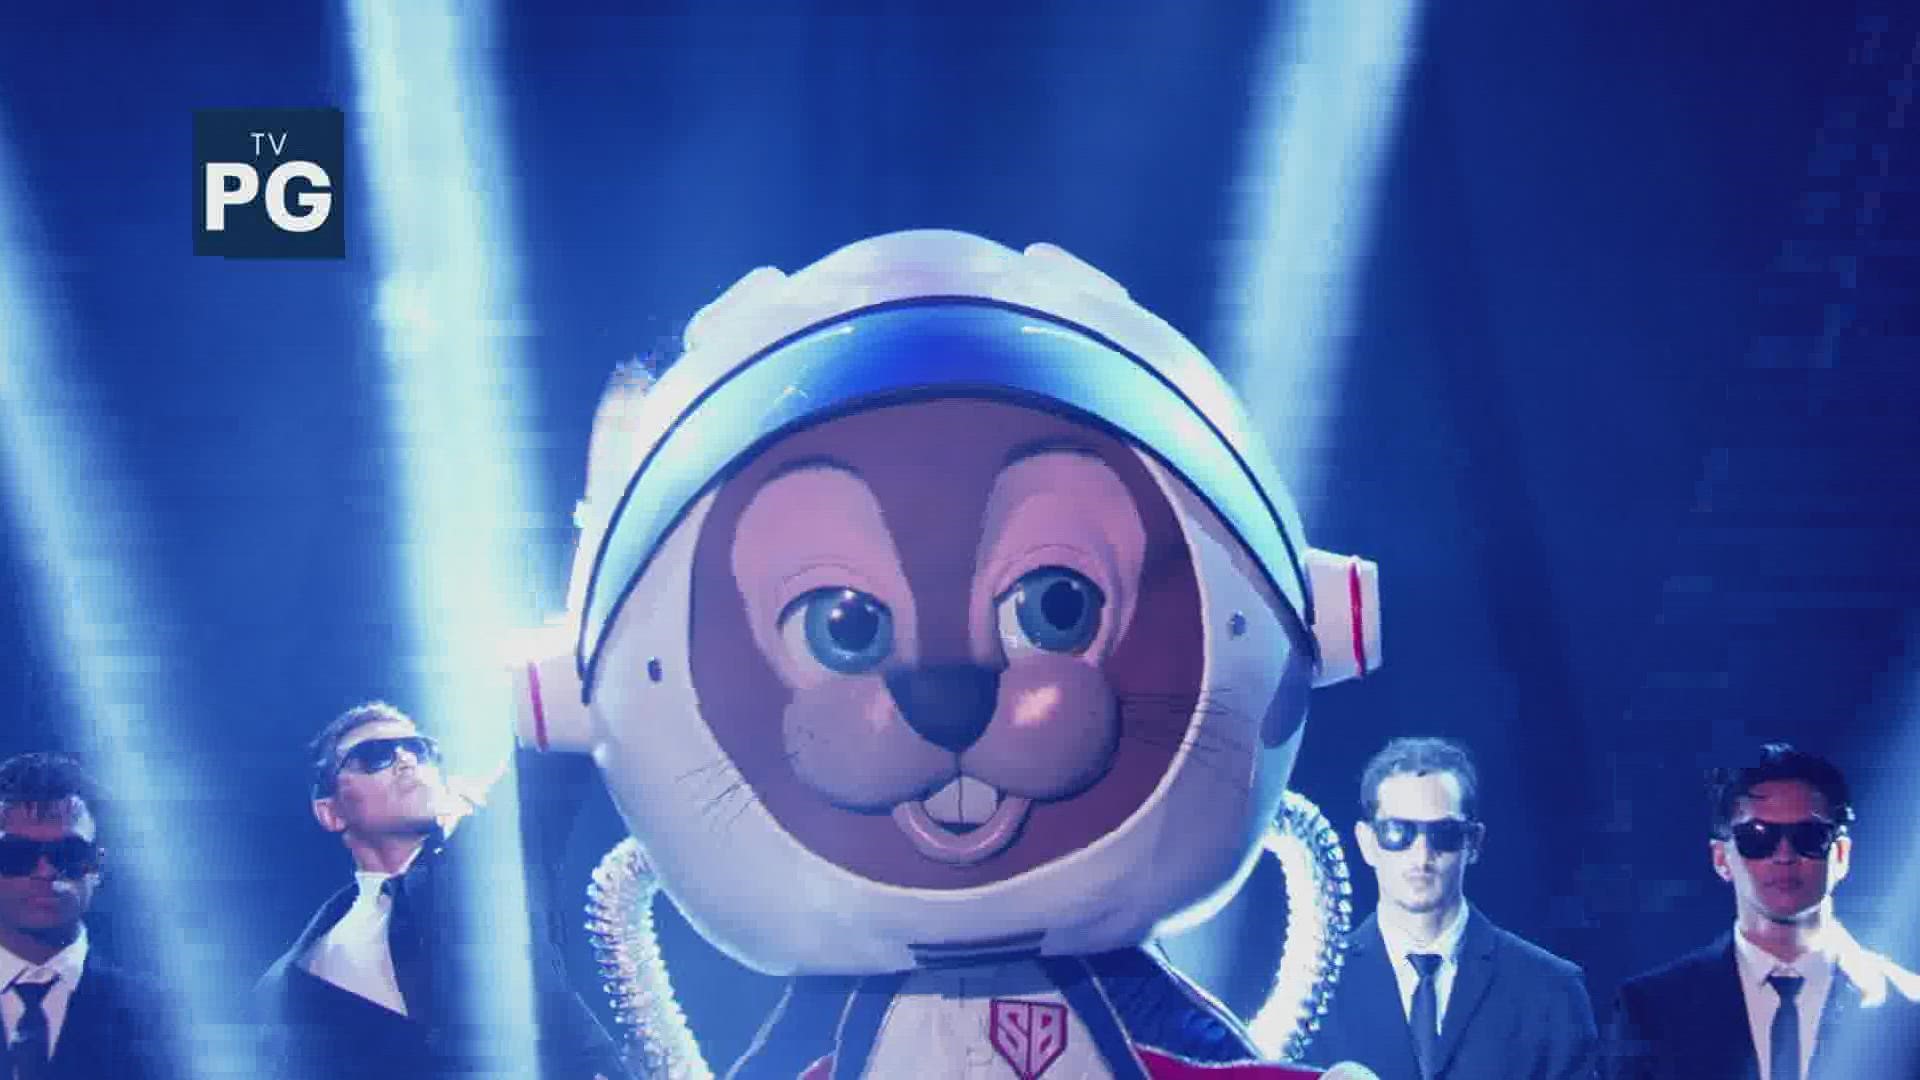 Who was behind Space Bunny?